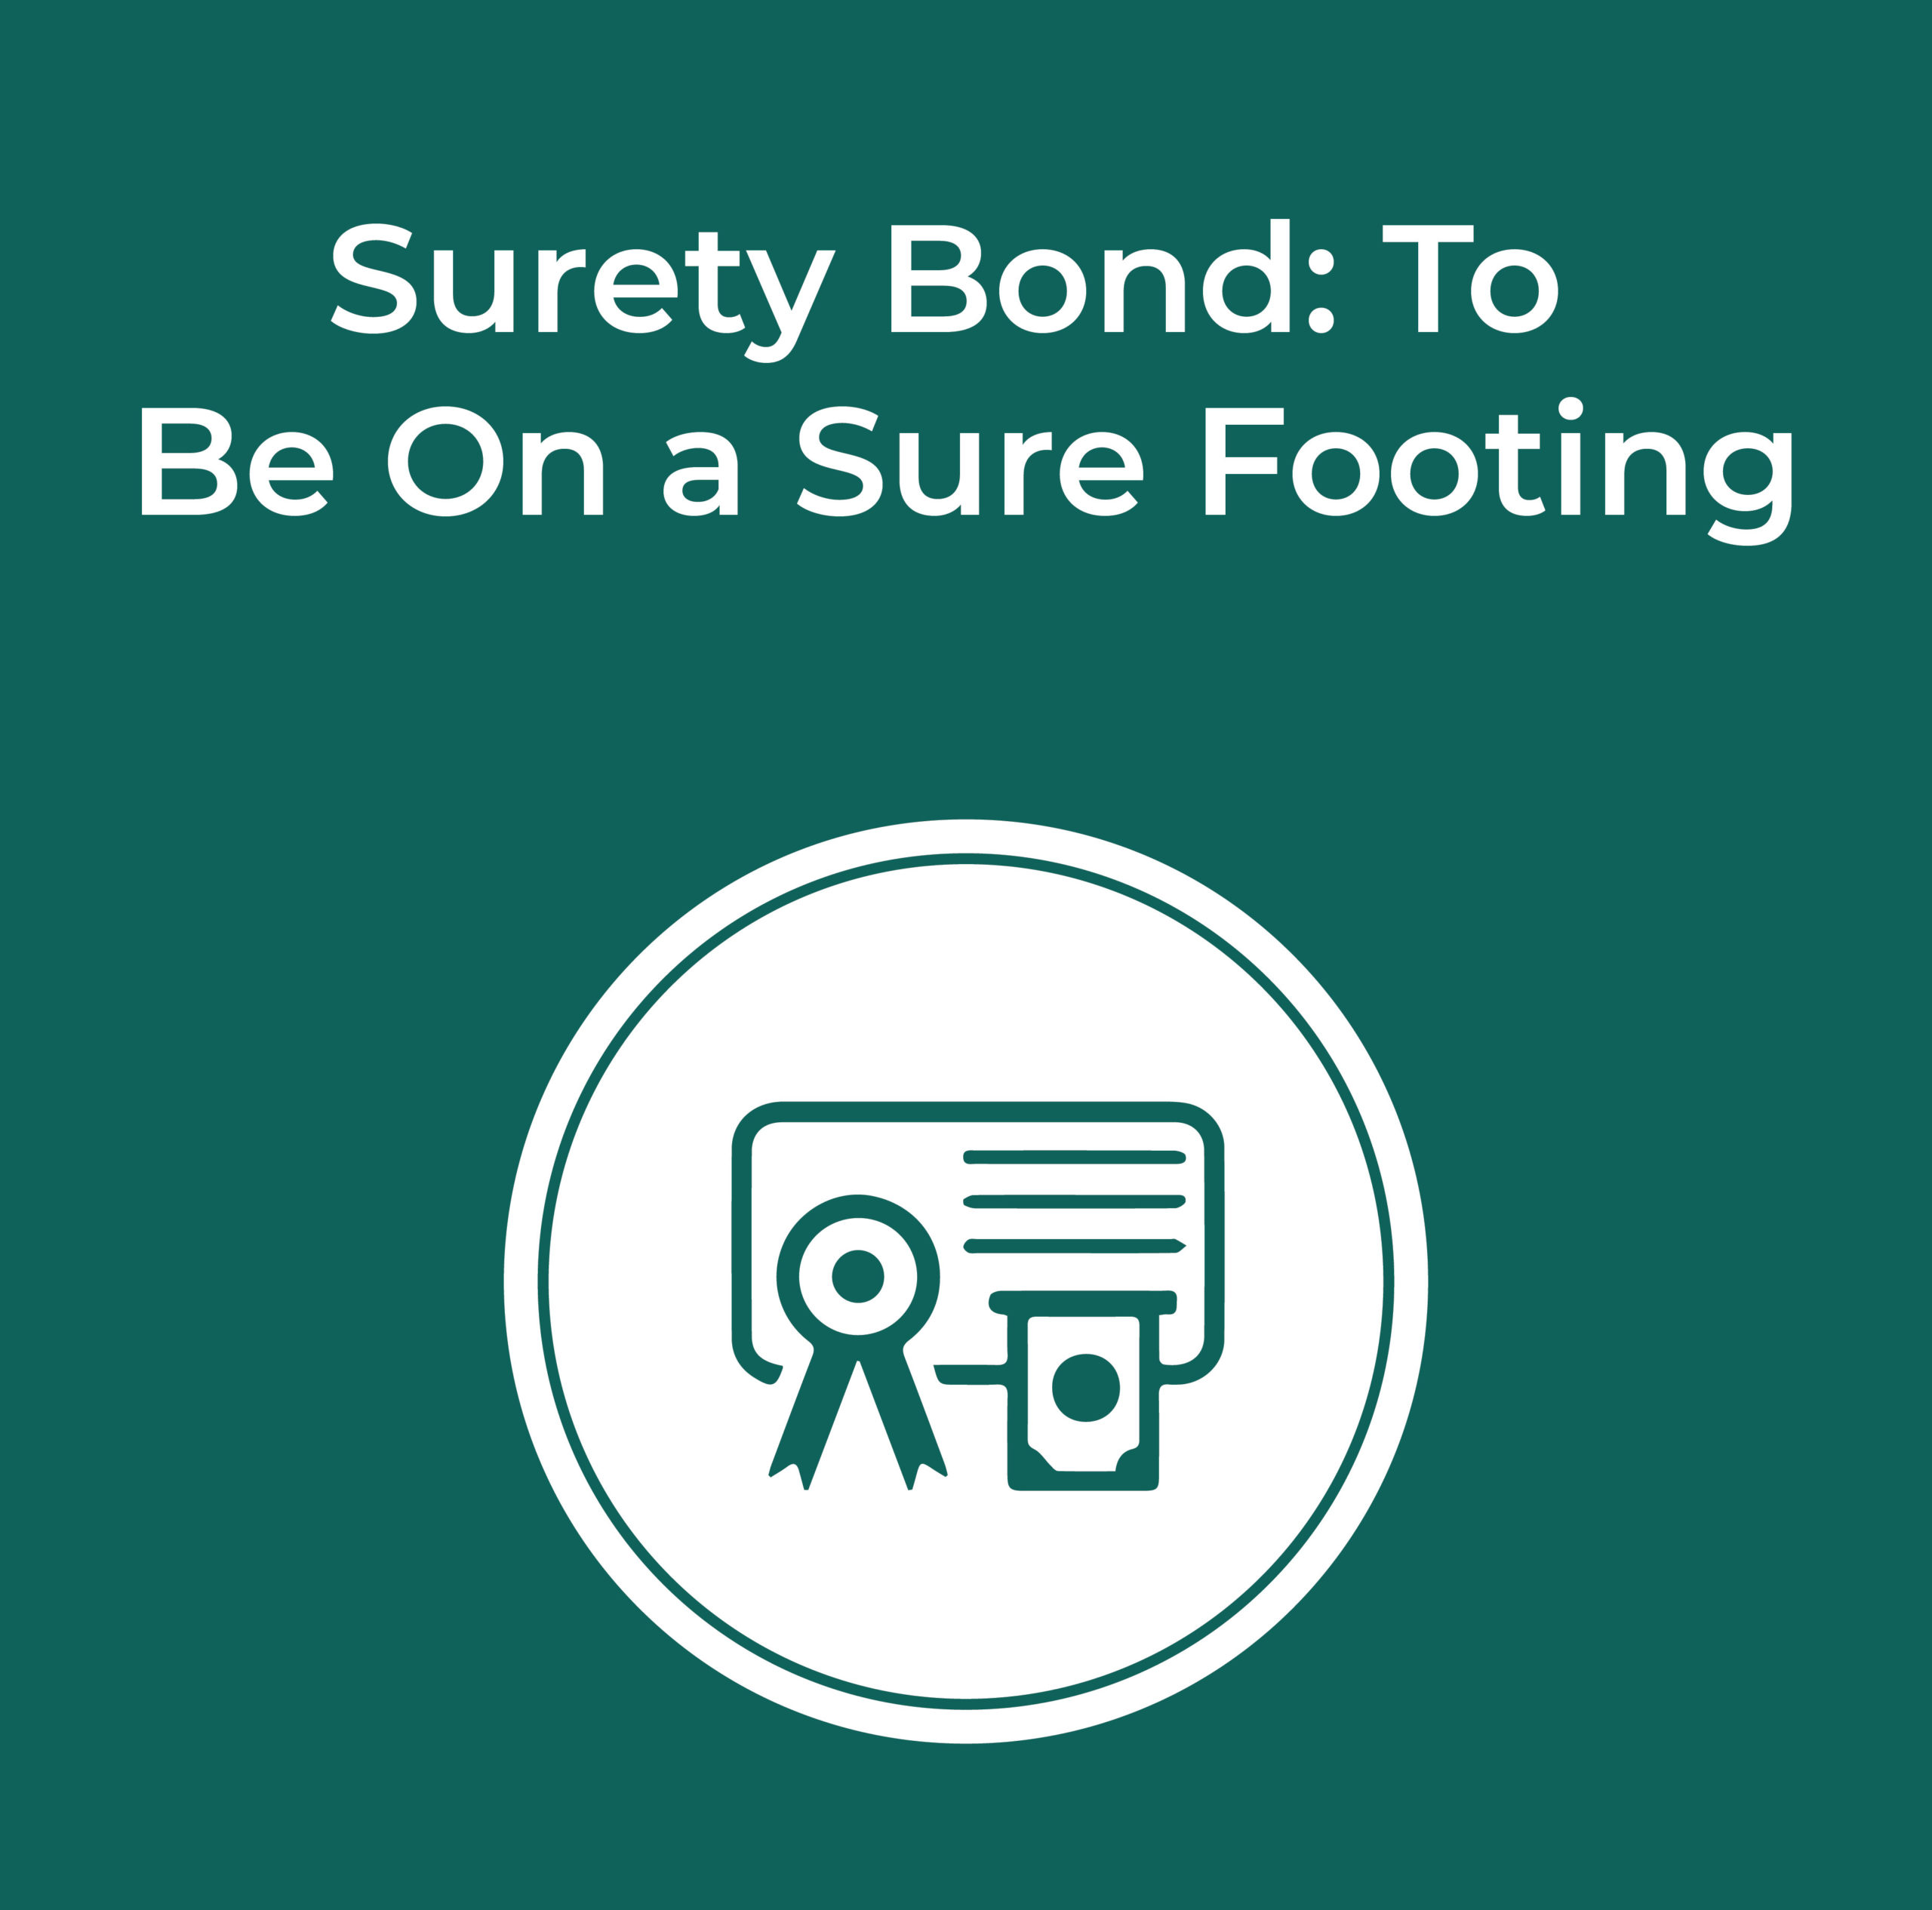 Surety Bond: To Be On a Sure Footing